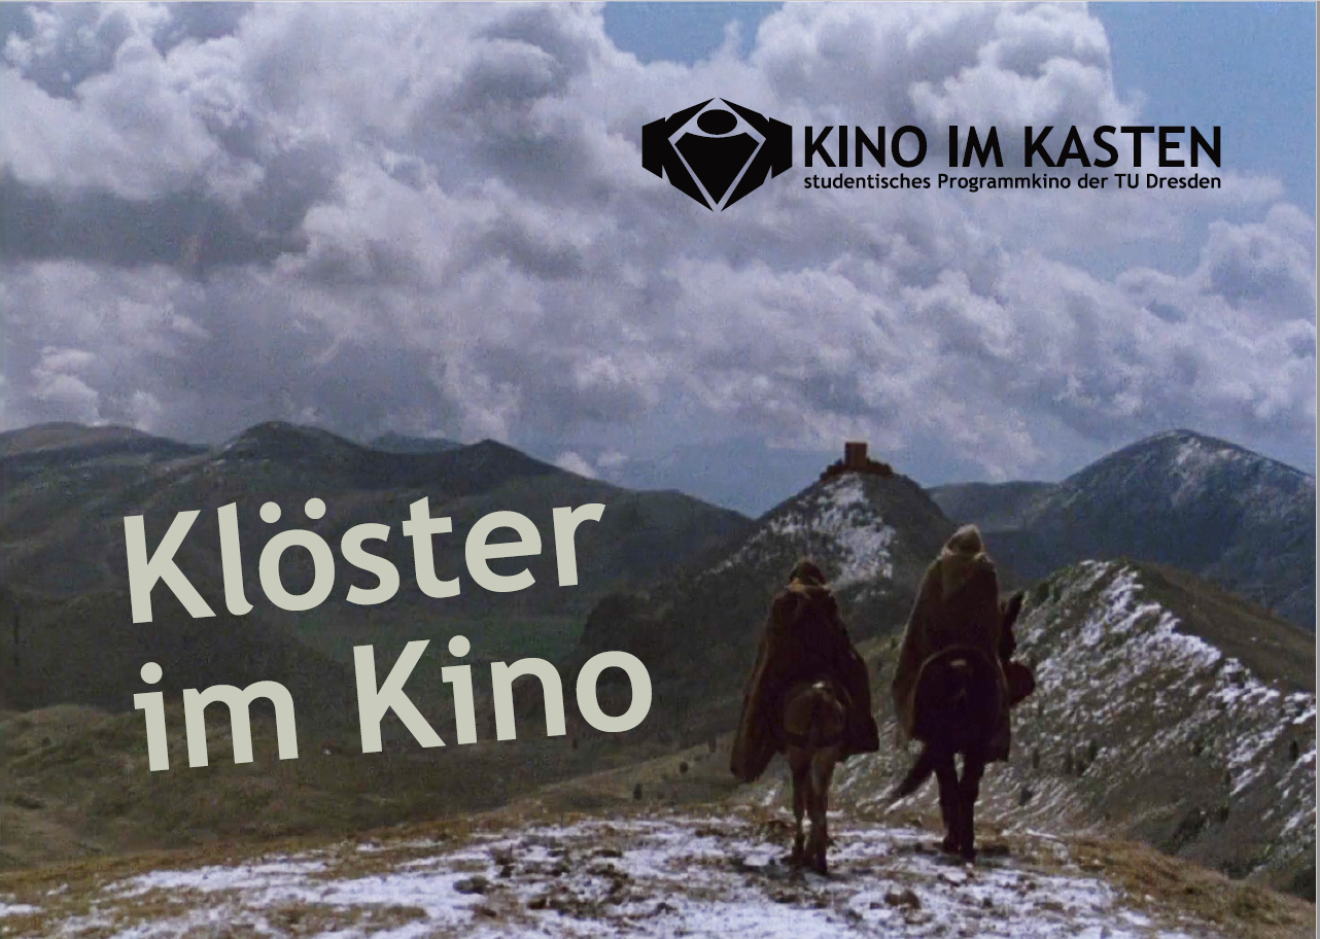 Two horsemen cloaked in hooded cloaks in the mountains, top right logo of Kino im Kasten, bottom left the lettering Klöster im Kino (Monasteries in the cinema)